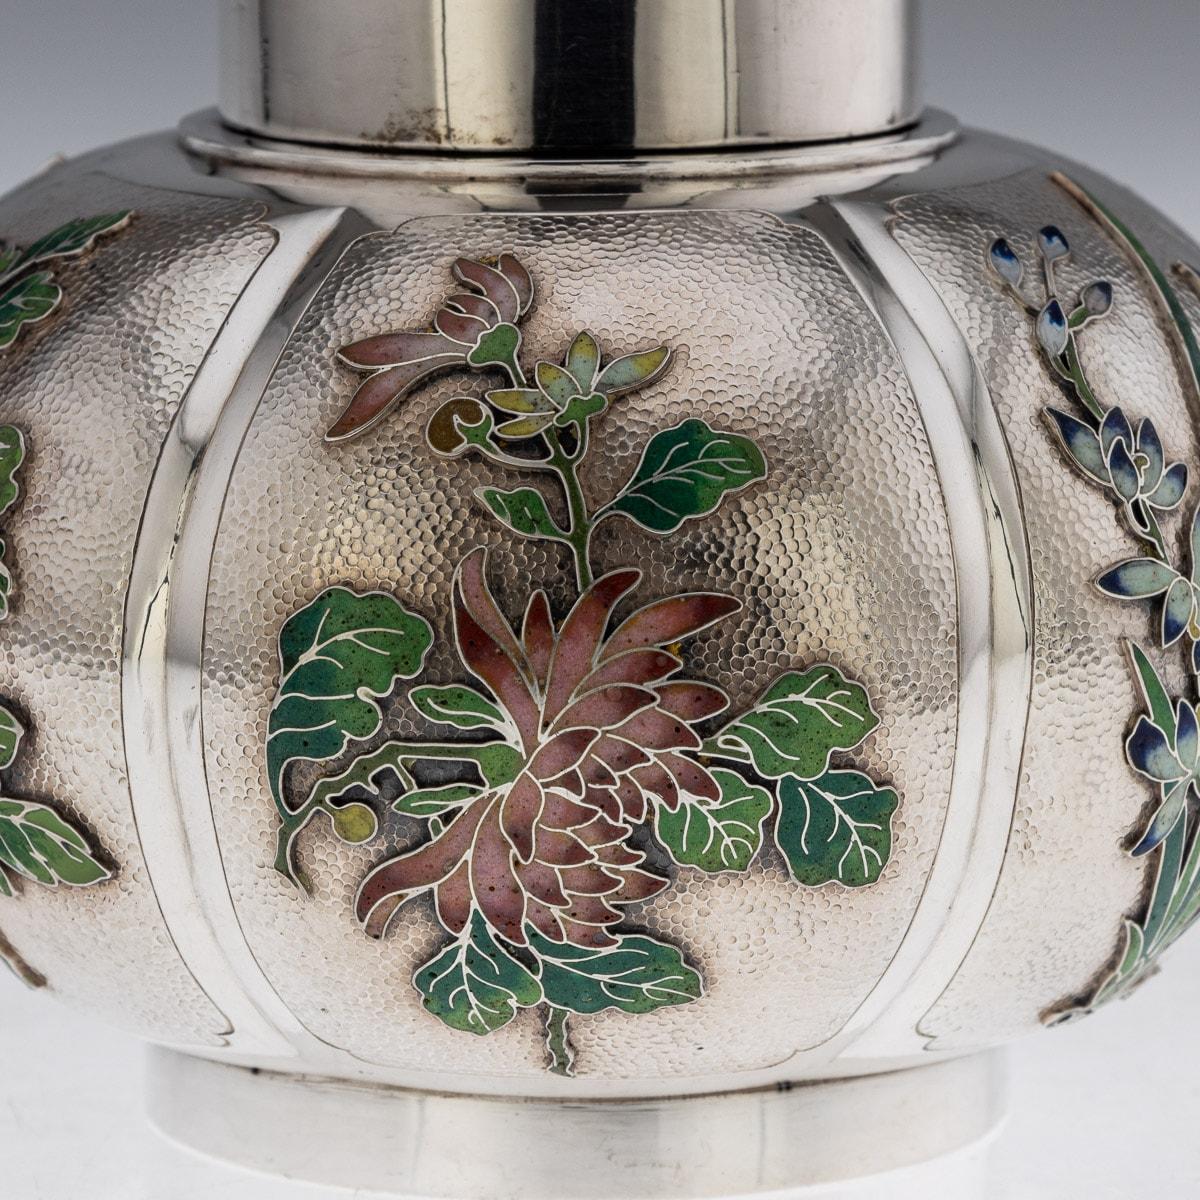 20th Century Chinese Export Solid Silver & Enamel Tea Caddy, Luen Wo, c.1900 9